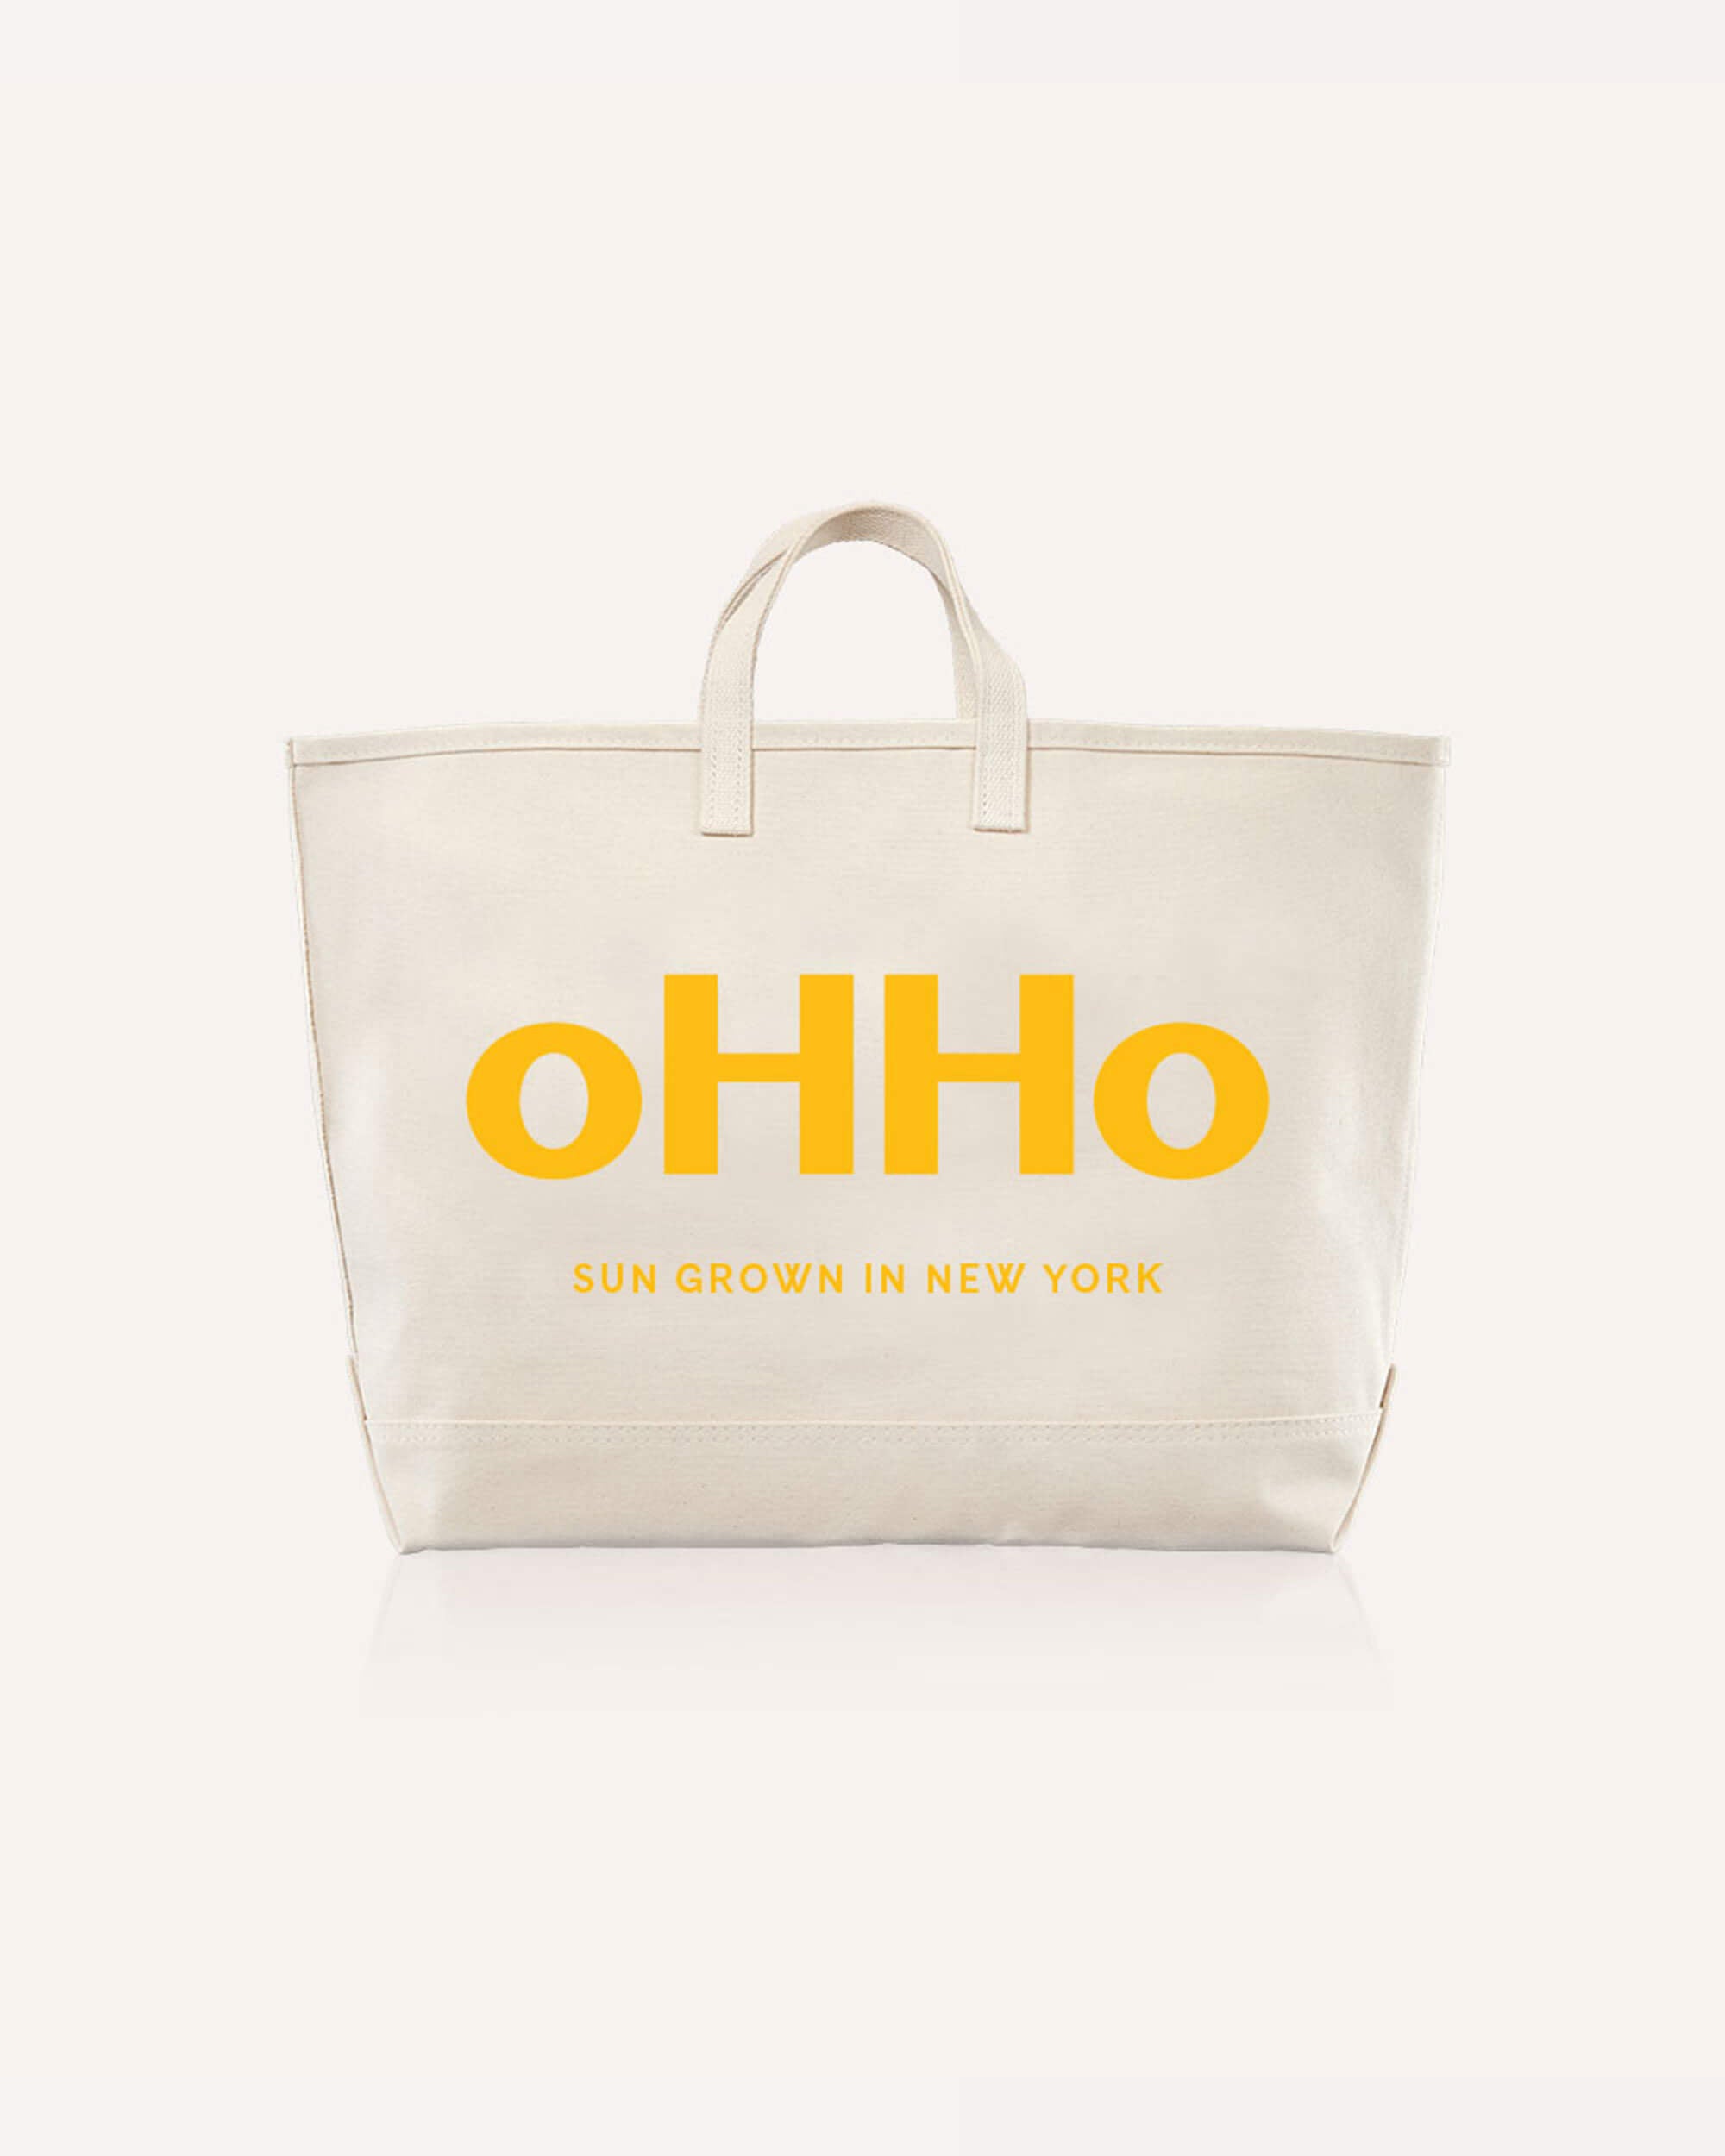 A canvas tote bag with oHHo logo on it in yellow